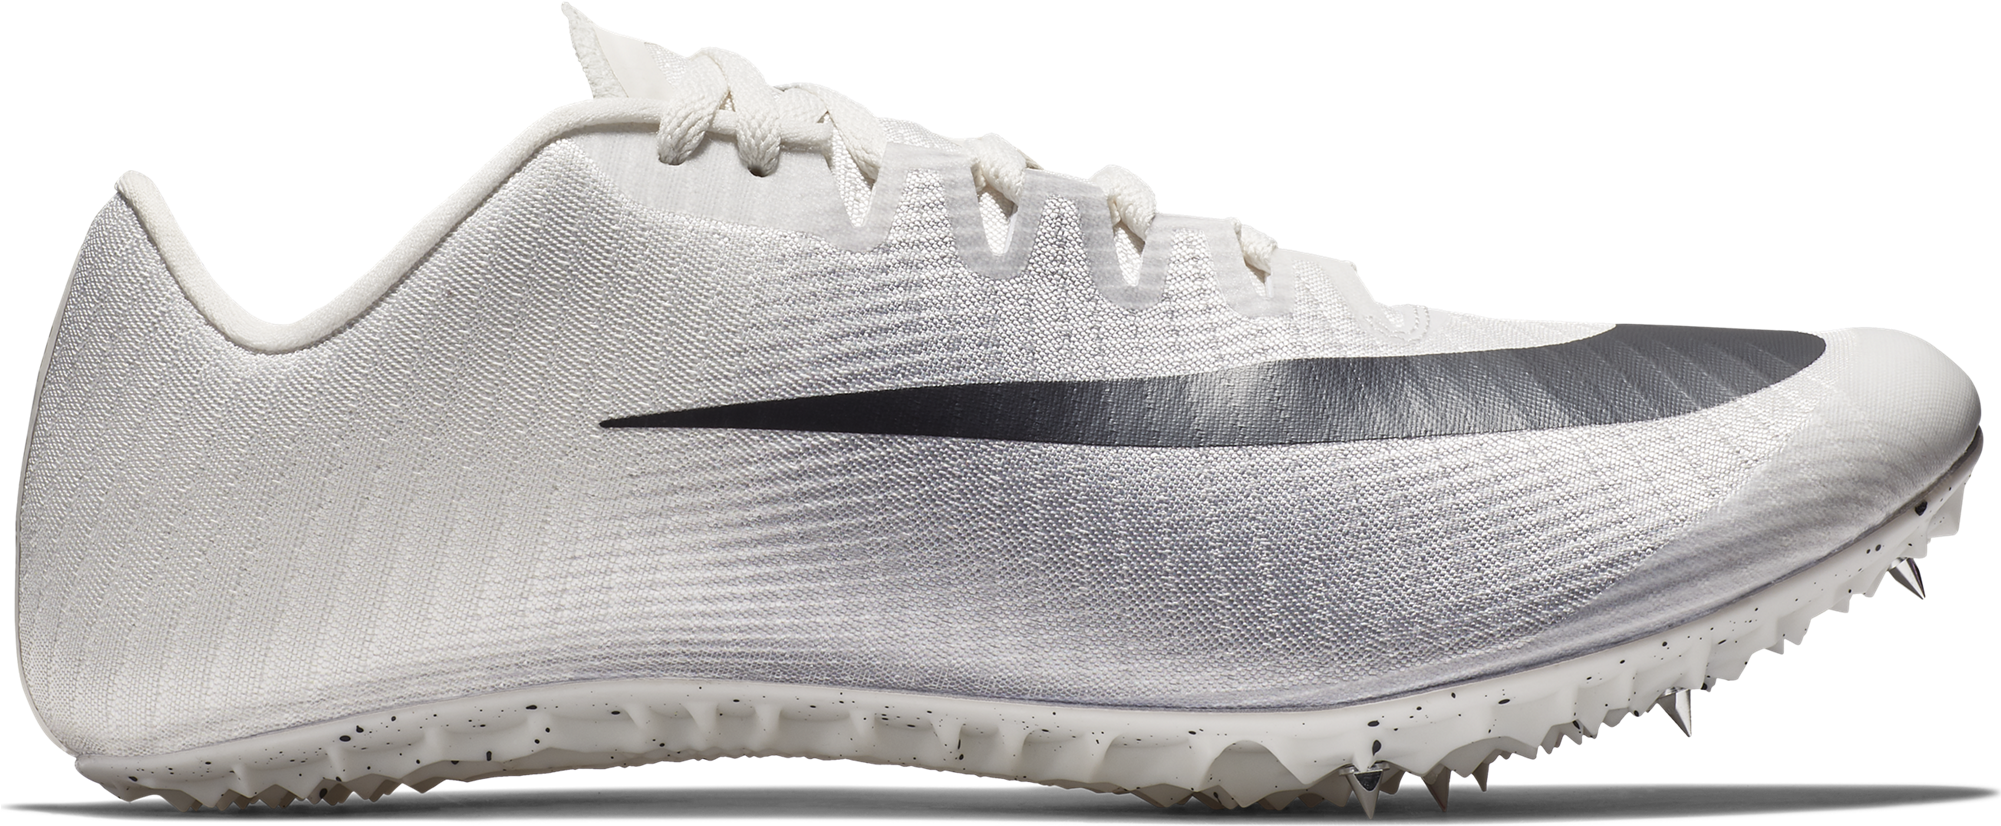 Unisex Zoom Ja Fly 3 Track Spike - Nike Zoom Ja Fly 3 White (2000x2000), Png Download